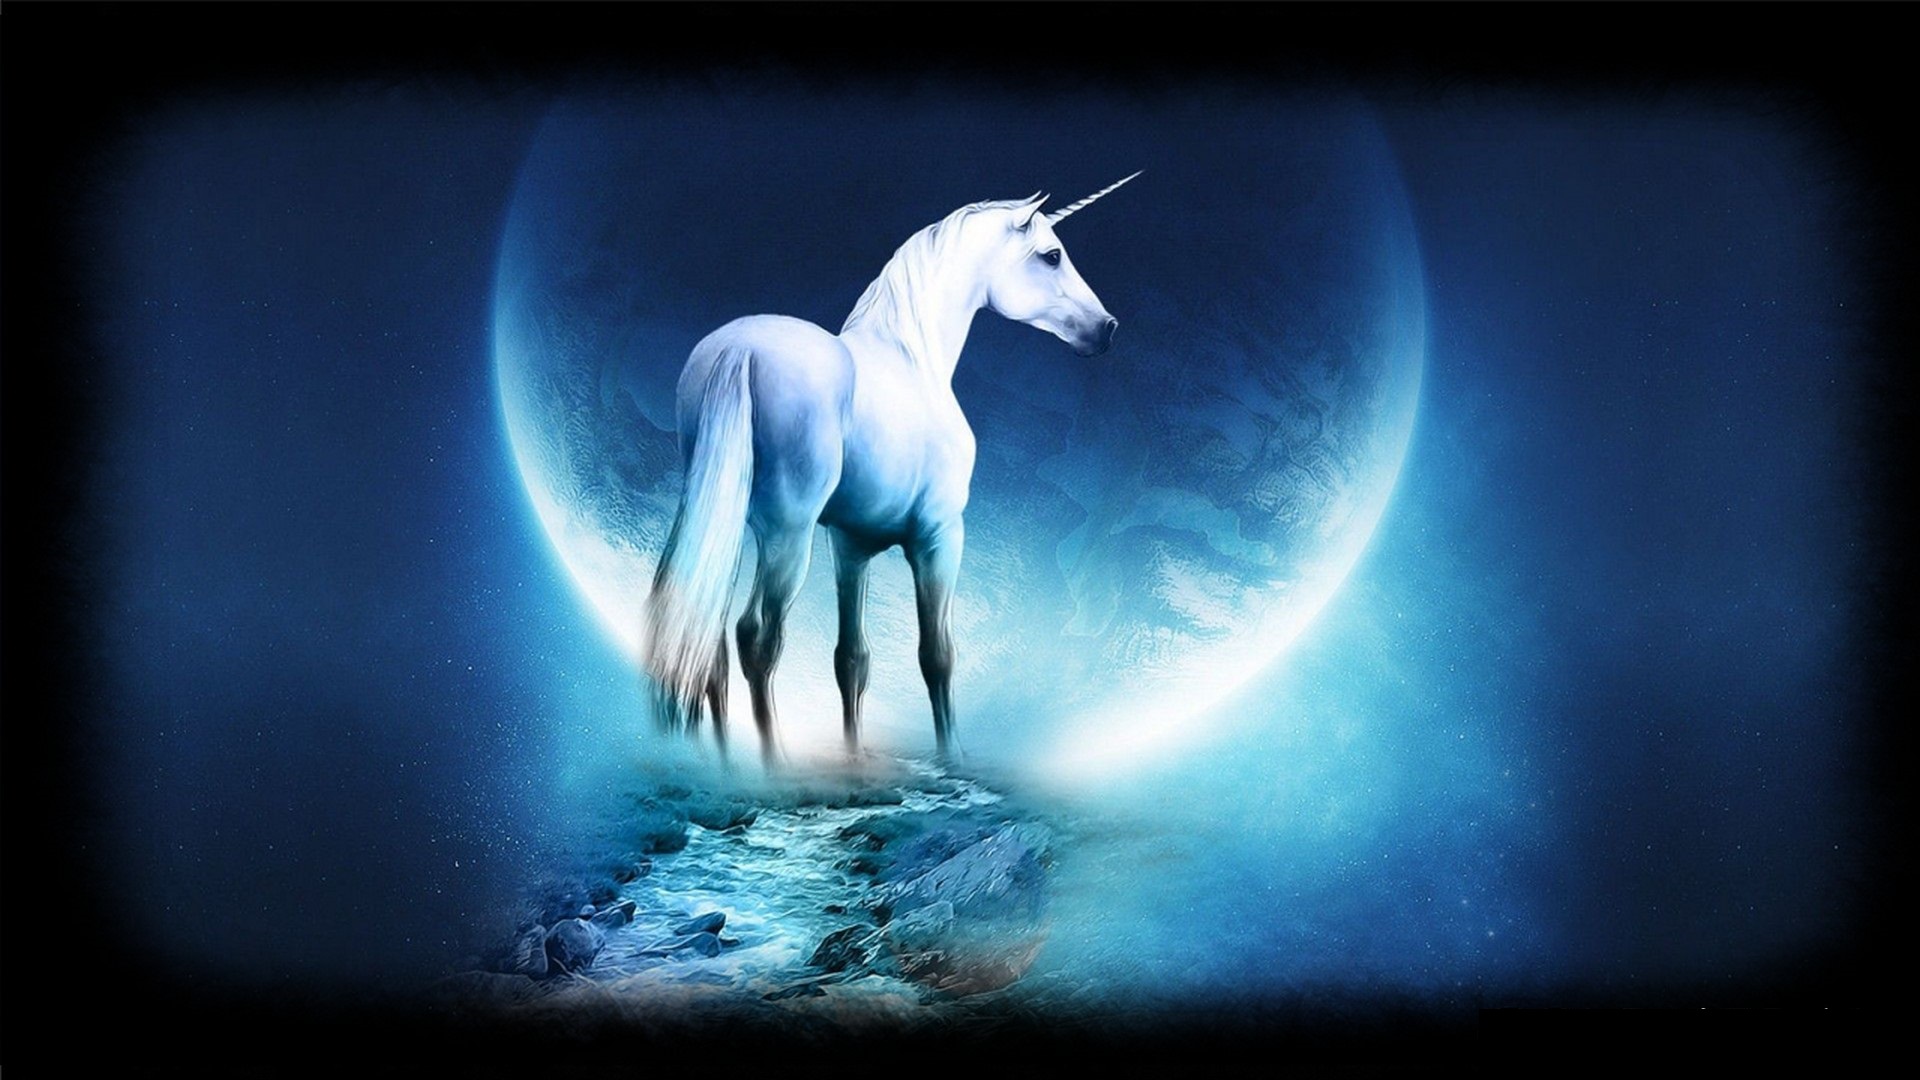 Wallpapers Computer Unicorn with high-resolution 1920x1080 pixel. You can use this wallpaper for your Desktop Computer Backgrounds, Mac Wallpapers, Android Lock screen or iPhone Screensavers and another smartphone device